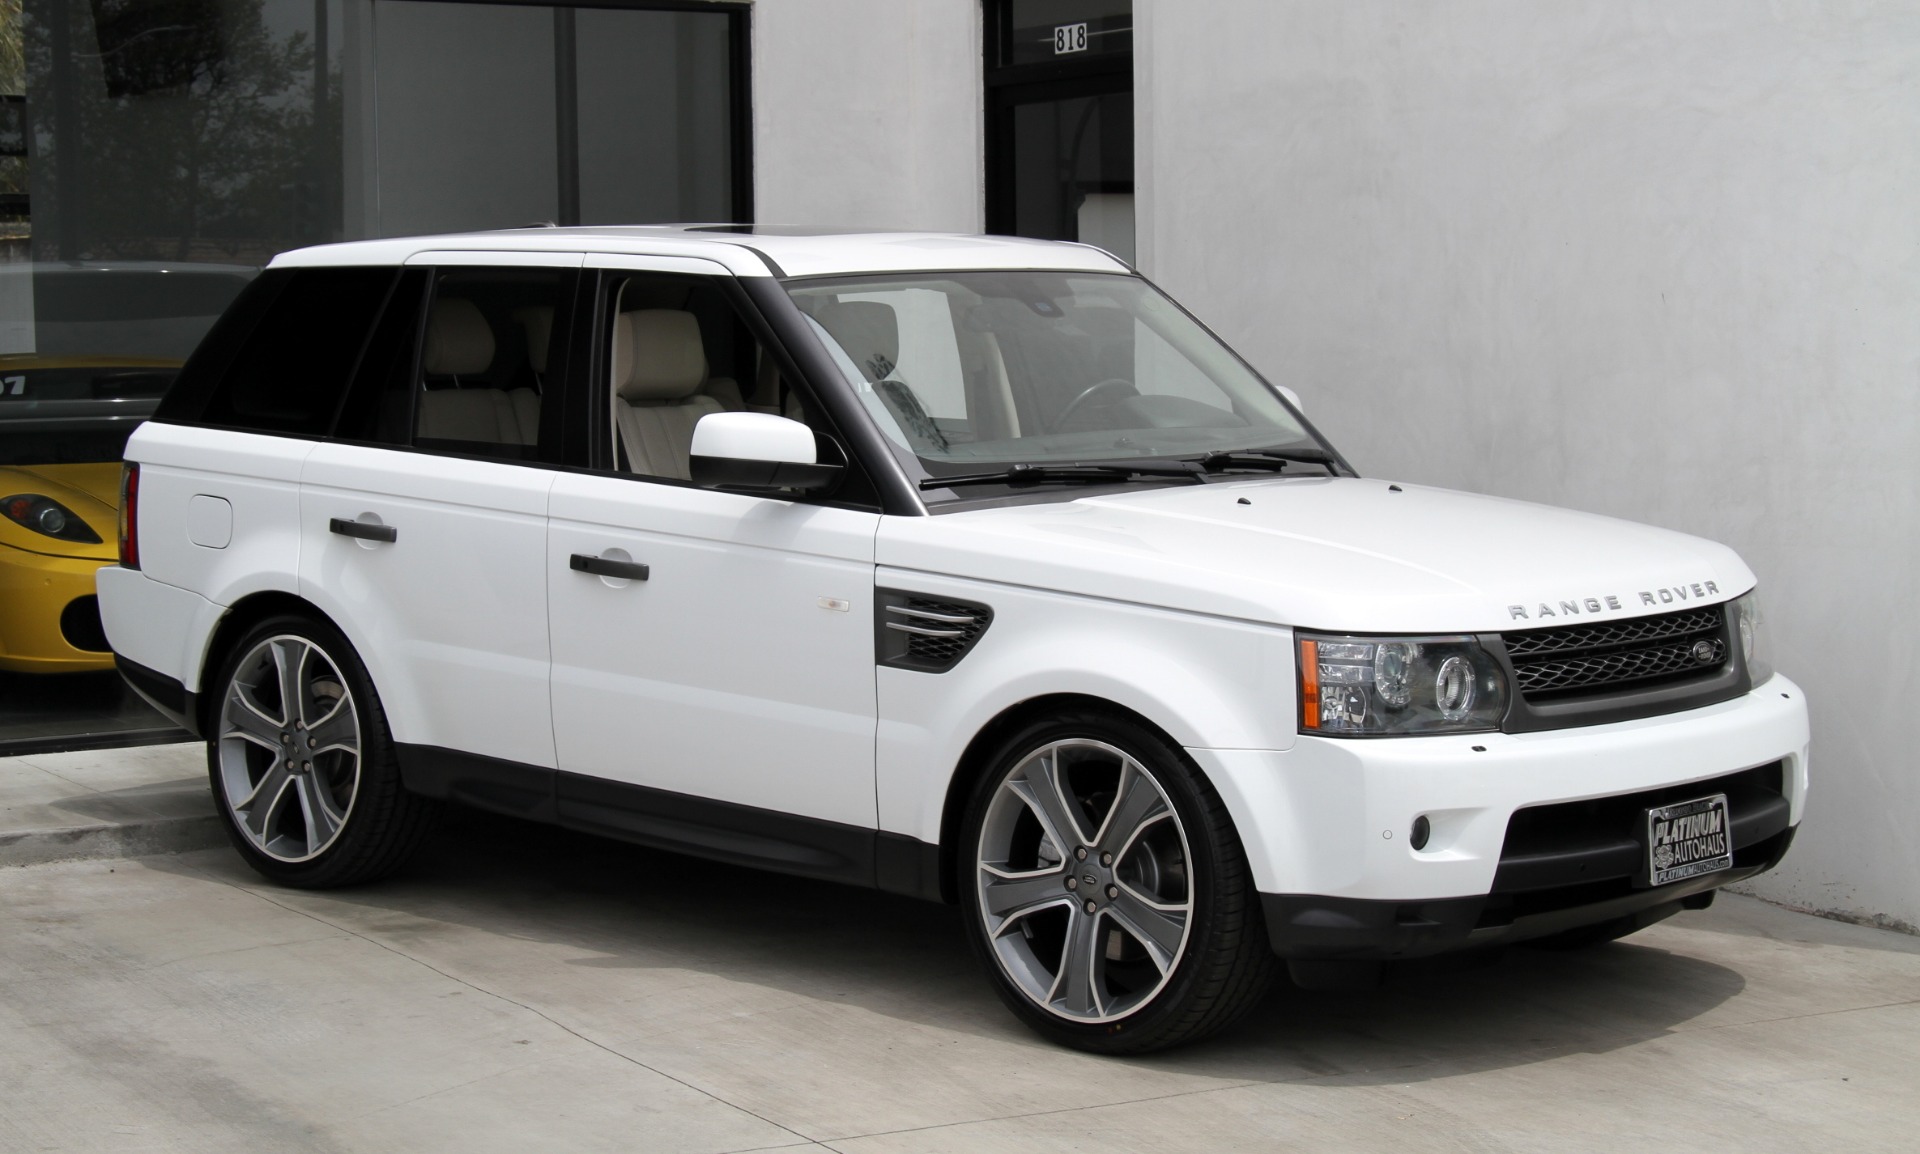 2011 Land Rover Range Rover Sport HSE *** LUXURY PACKAGE *** Stock # 6076A  for sale near Redondo Beach, CA | CA Land Rover Dealer